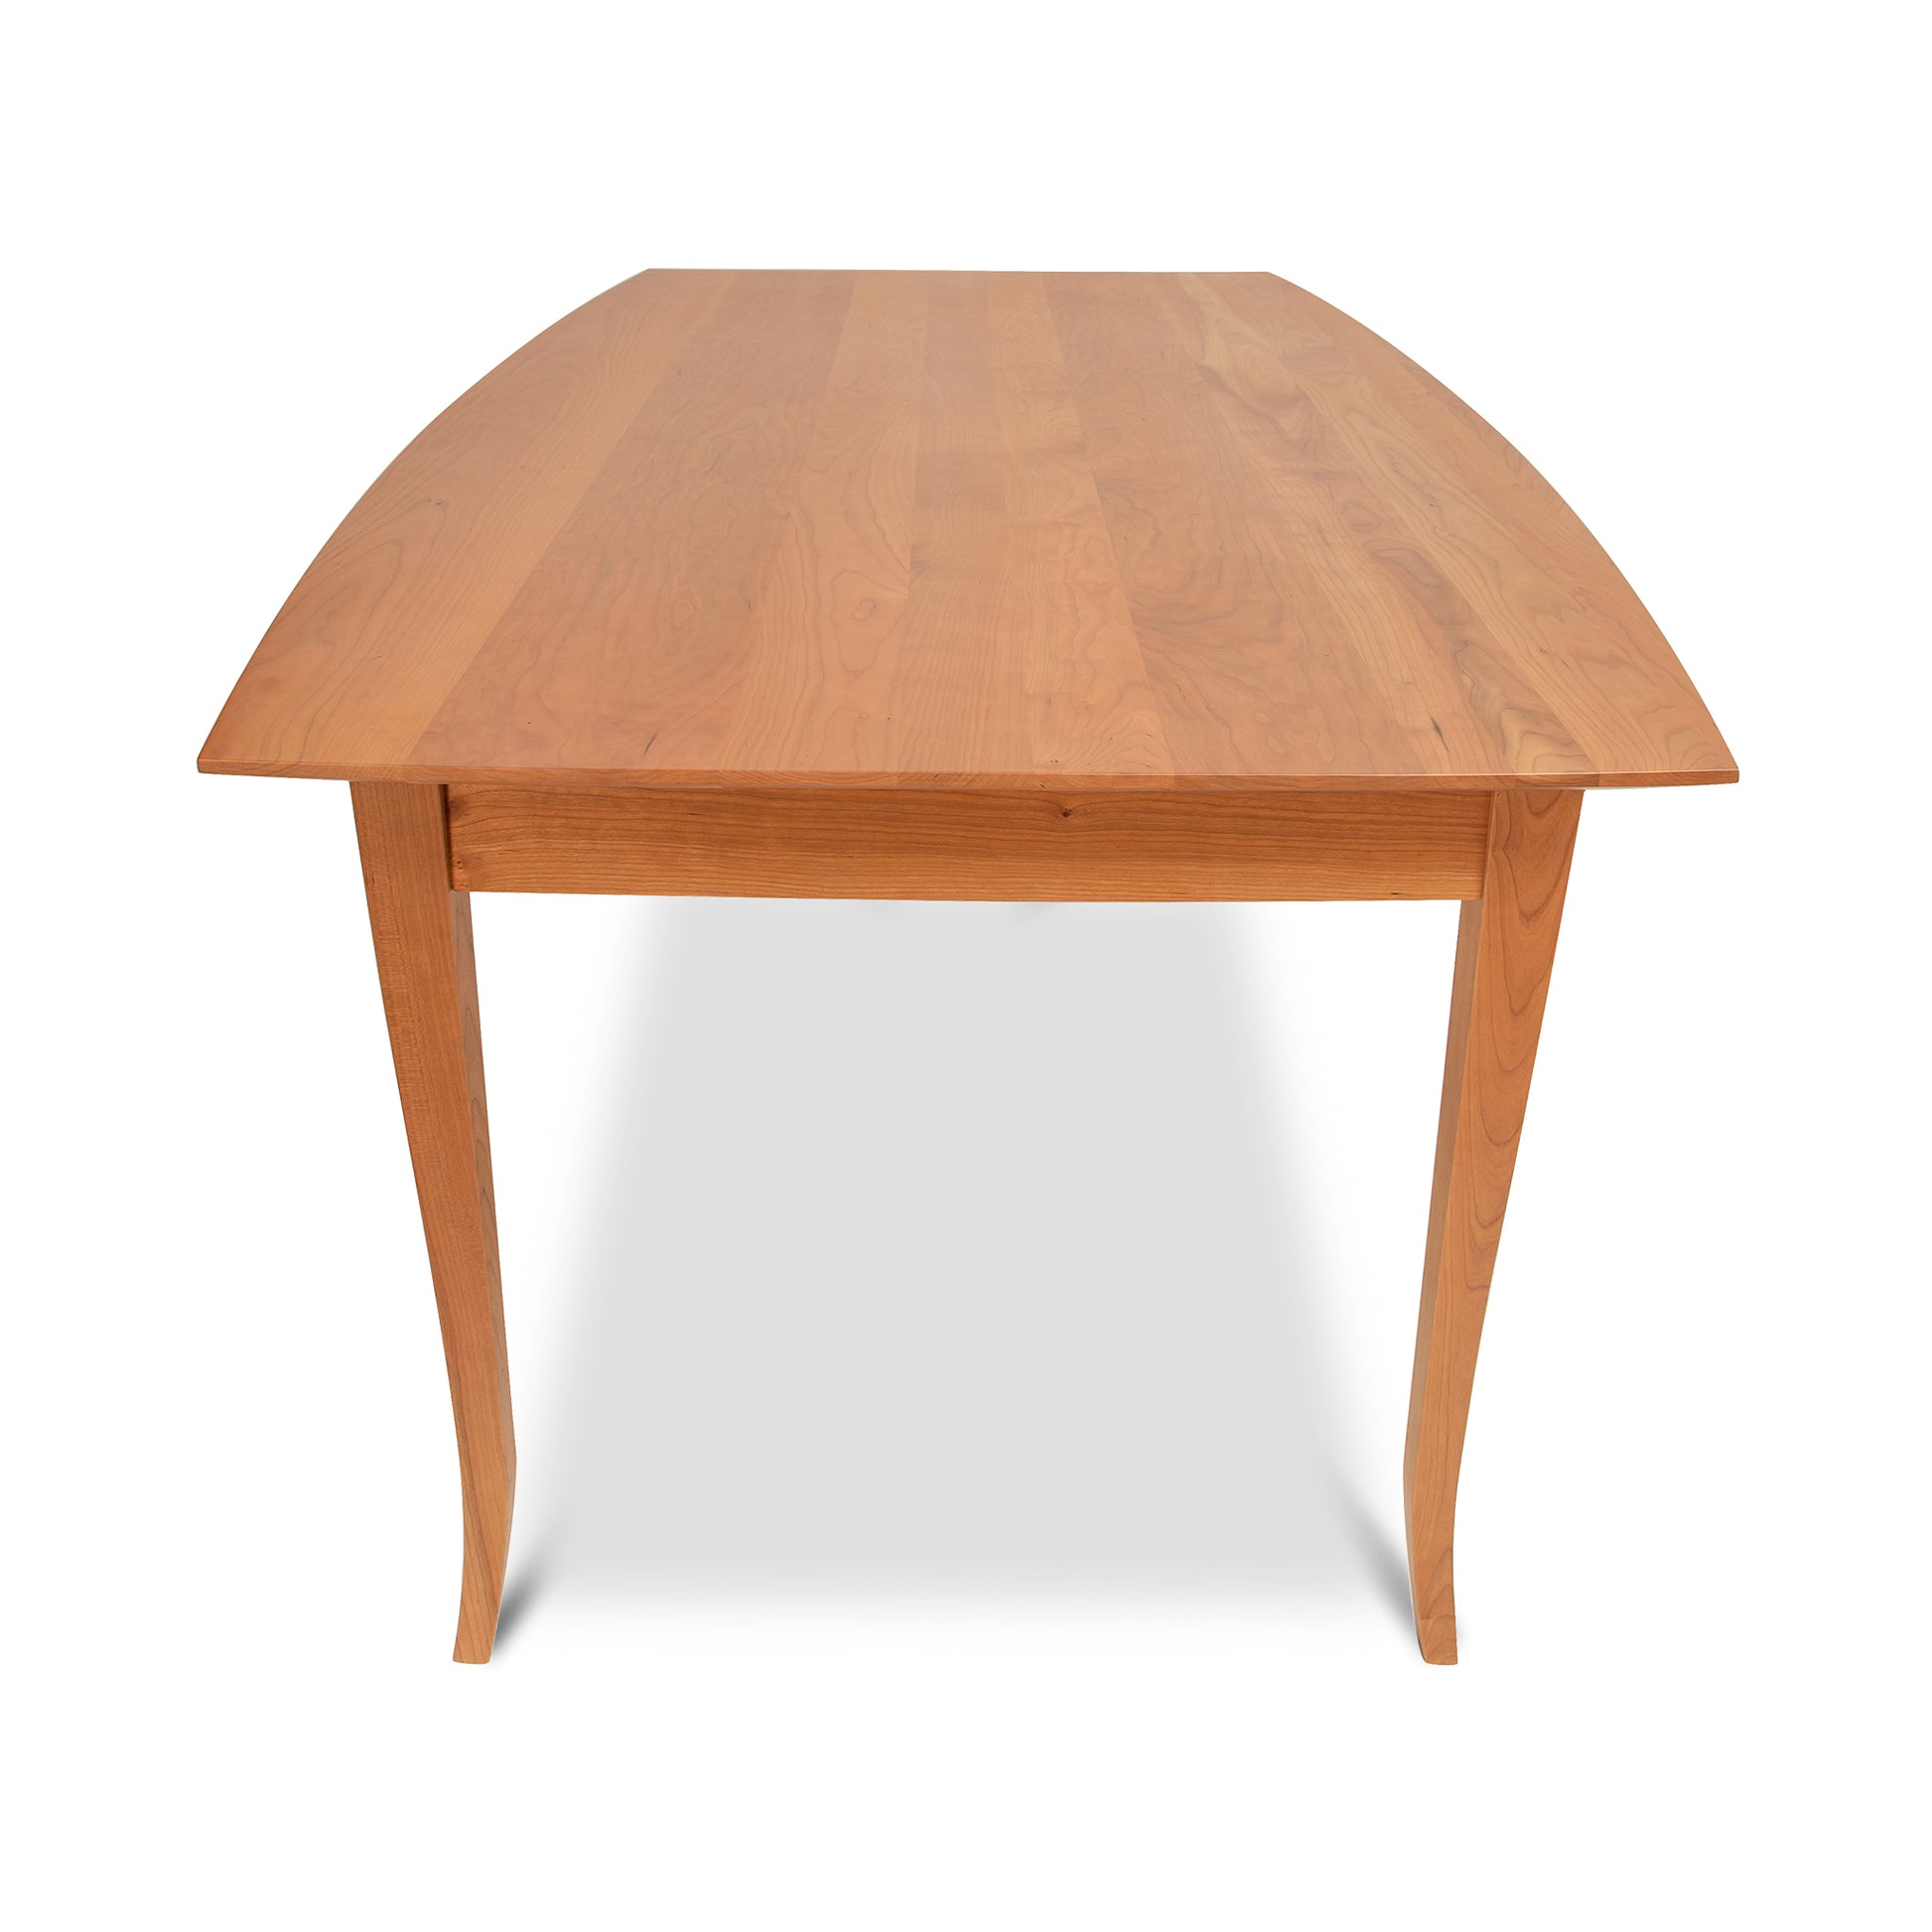 A Classic Shaker Flare Leg Solid Boat Top Table from Lyndon Furniture with flare legs.